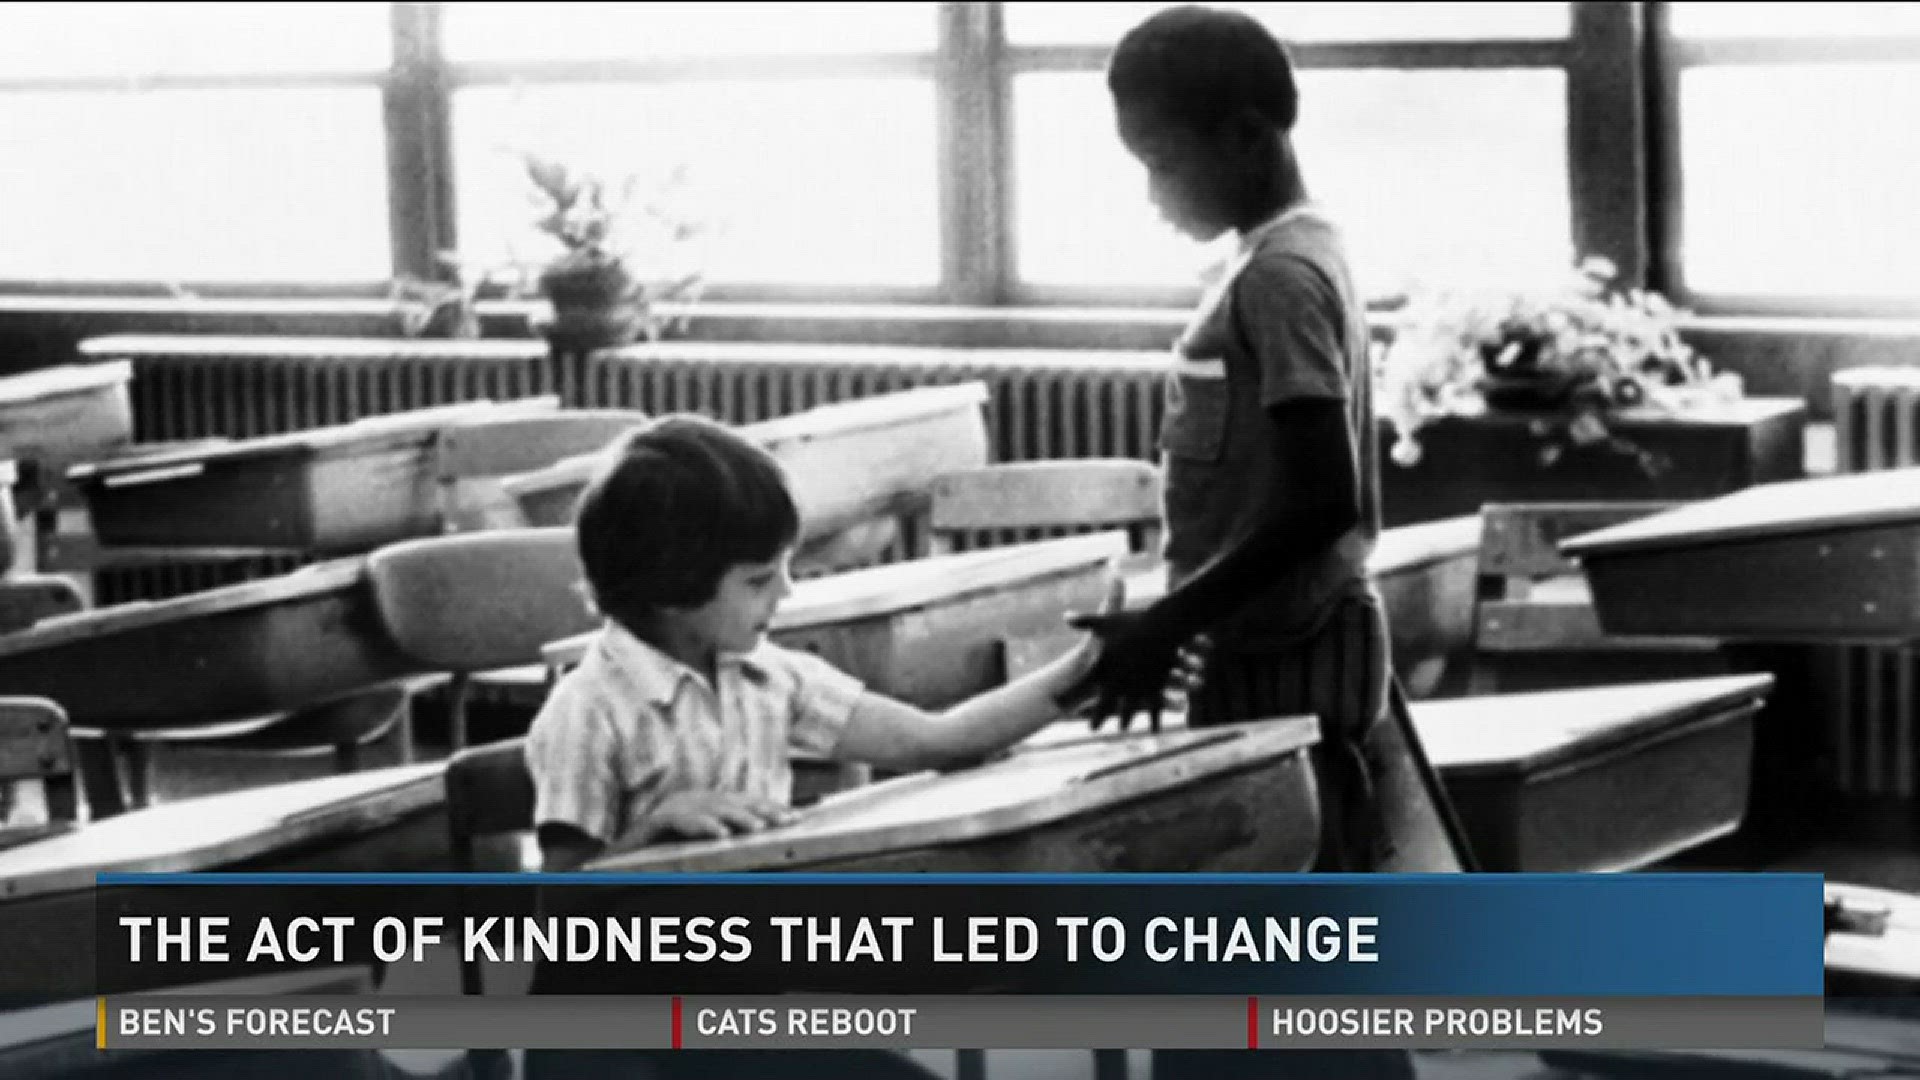 The act of kindness that led to change